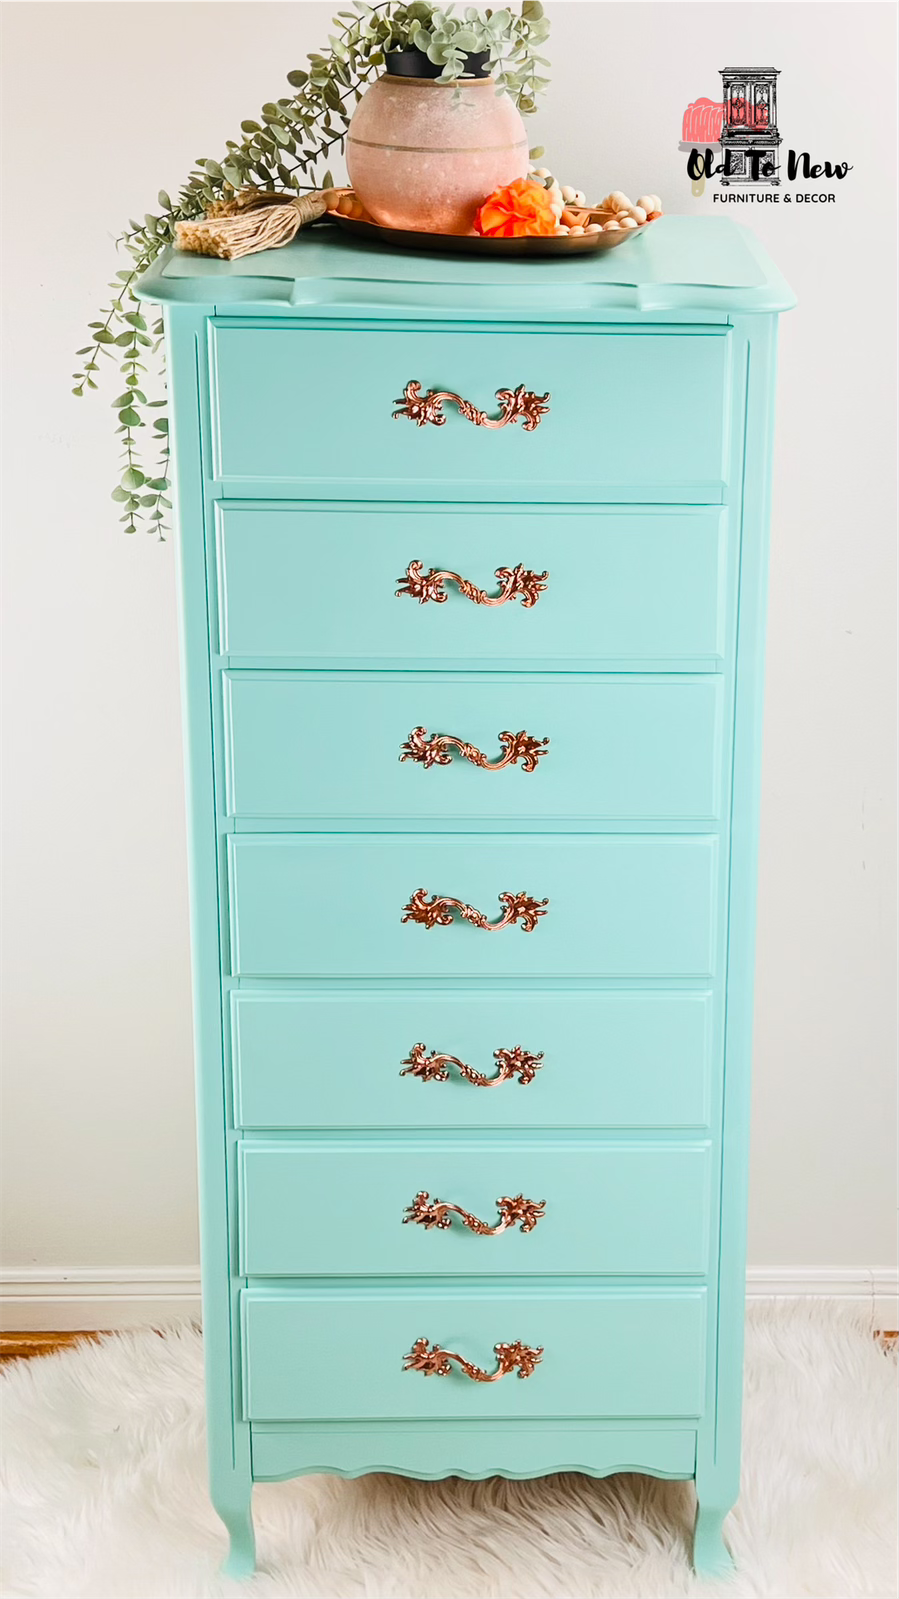 Gorgeous French Provincial Lingerie Armoire Now Available; Choose A Paint Color and Customize This Lingerie Chest.